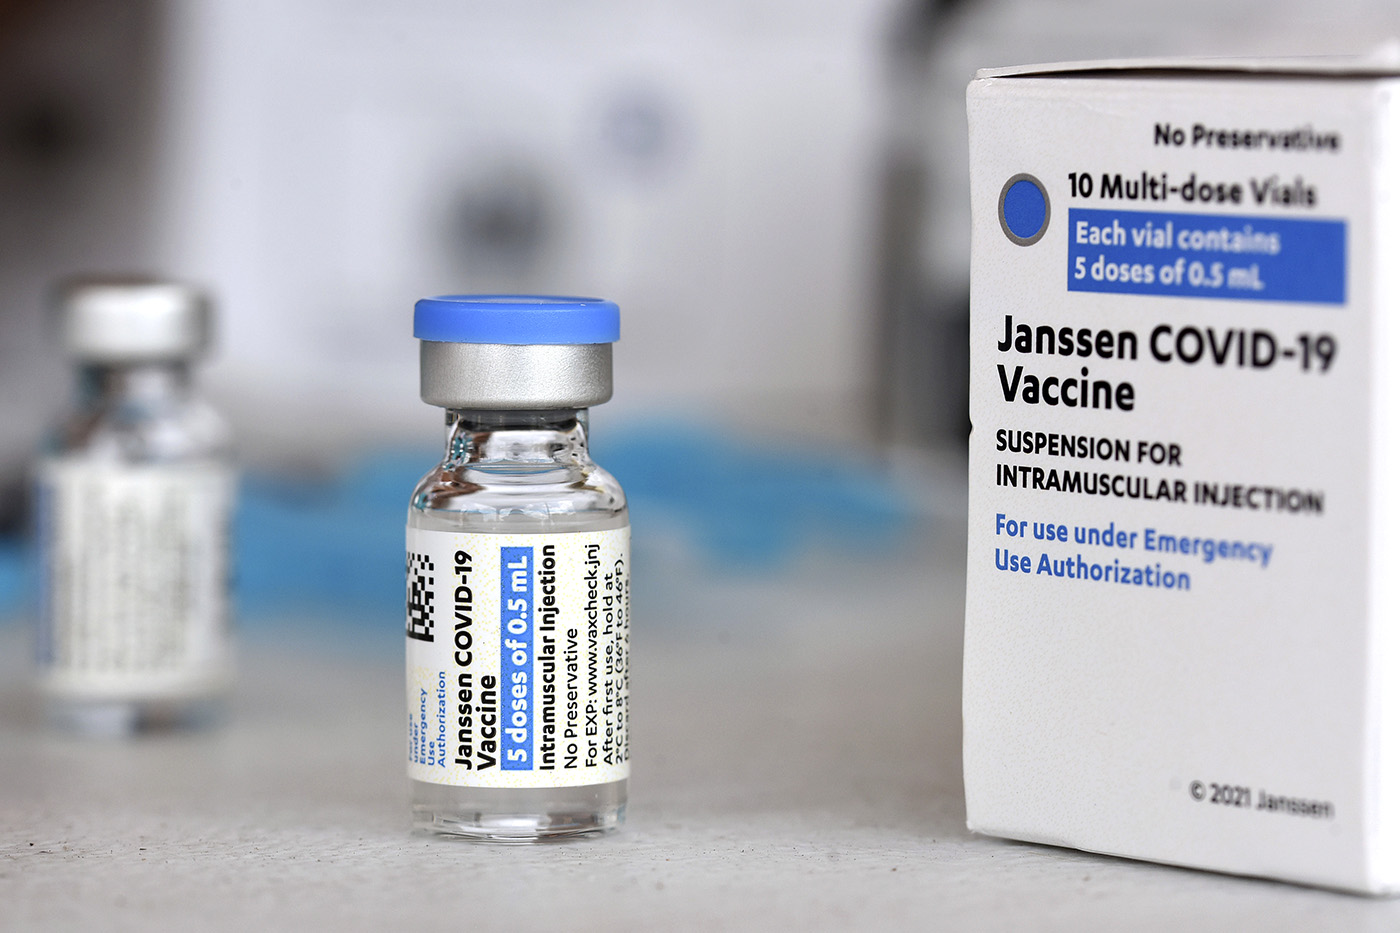 With the Johnson & Johnson COVID-19 vaccine pause, getting the message